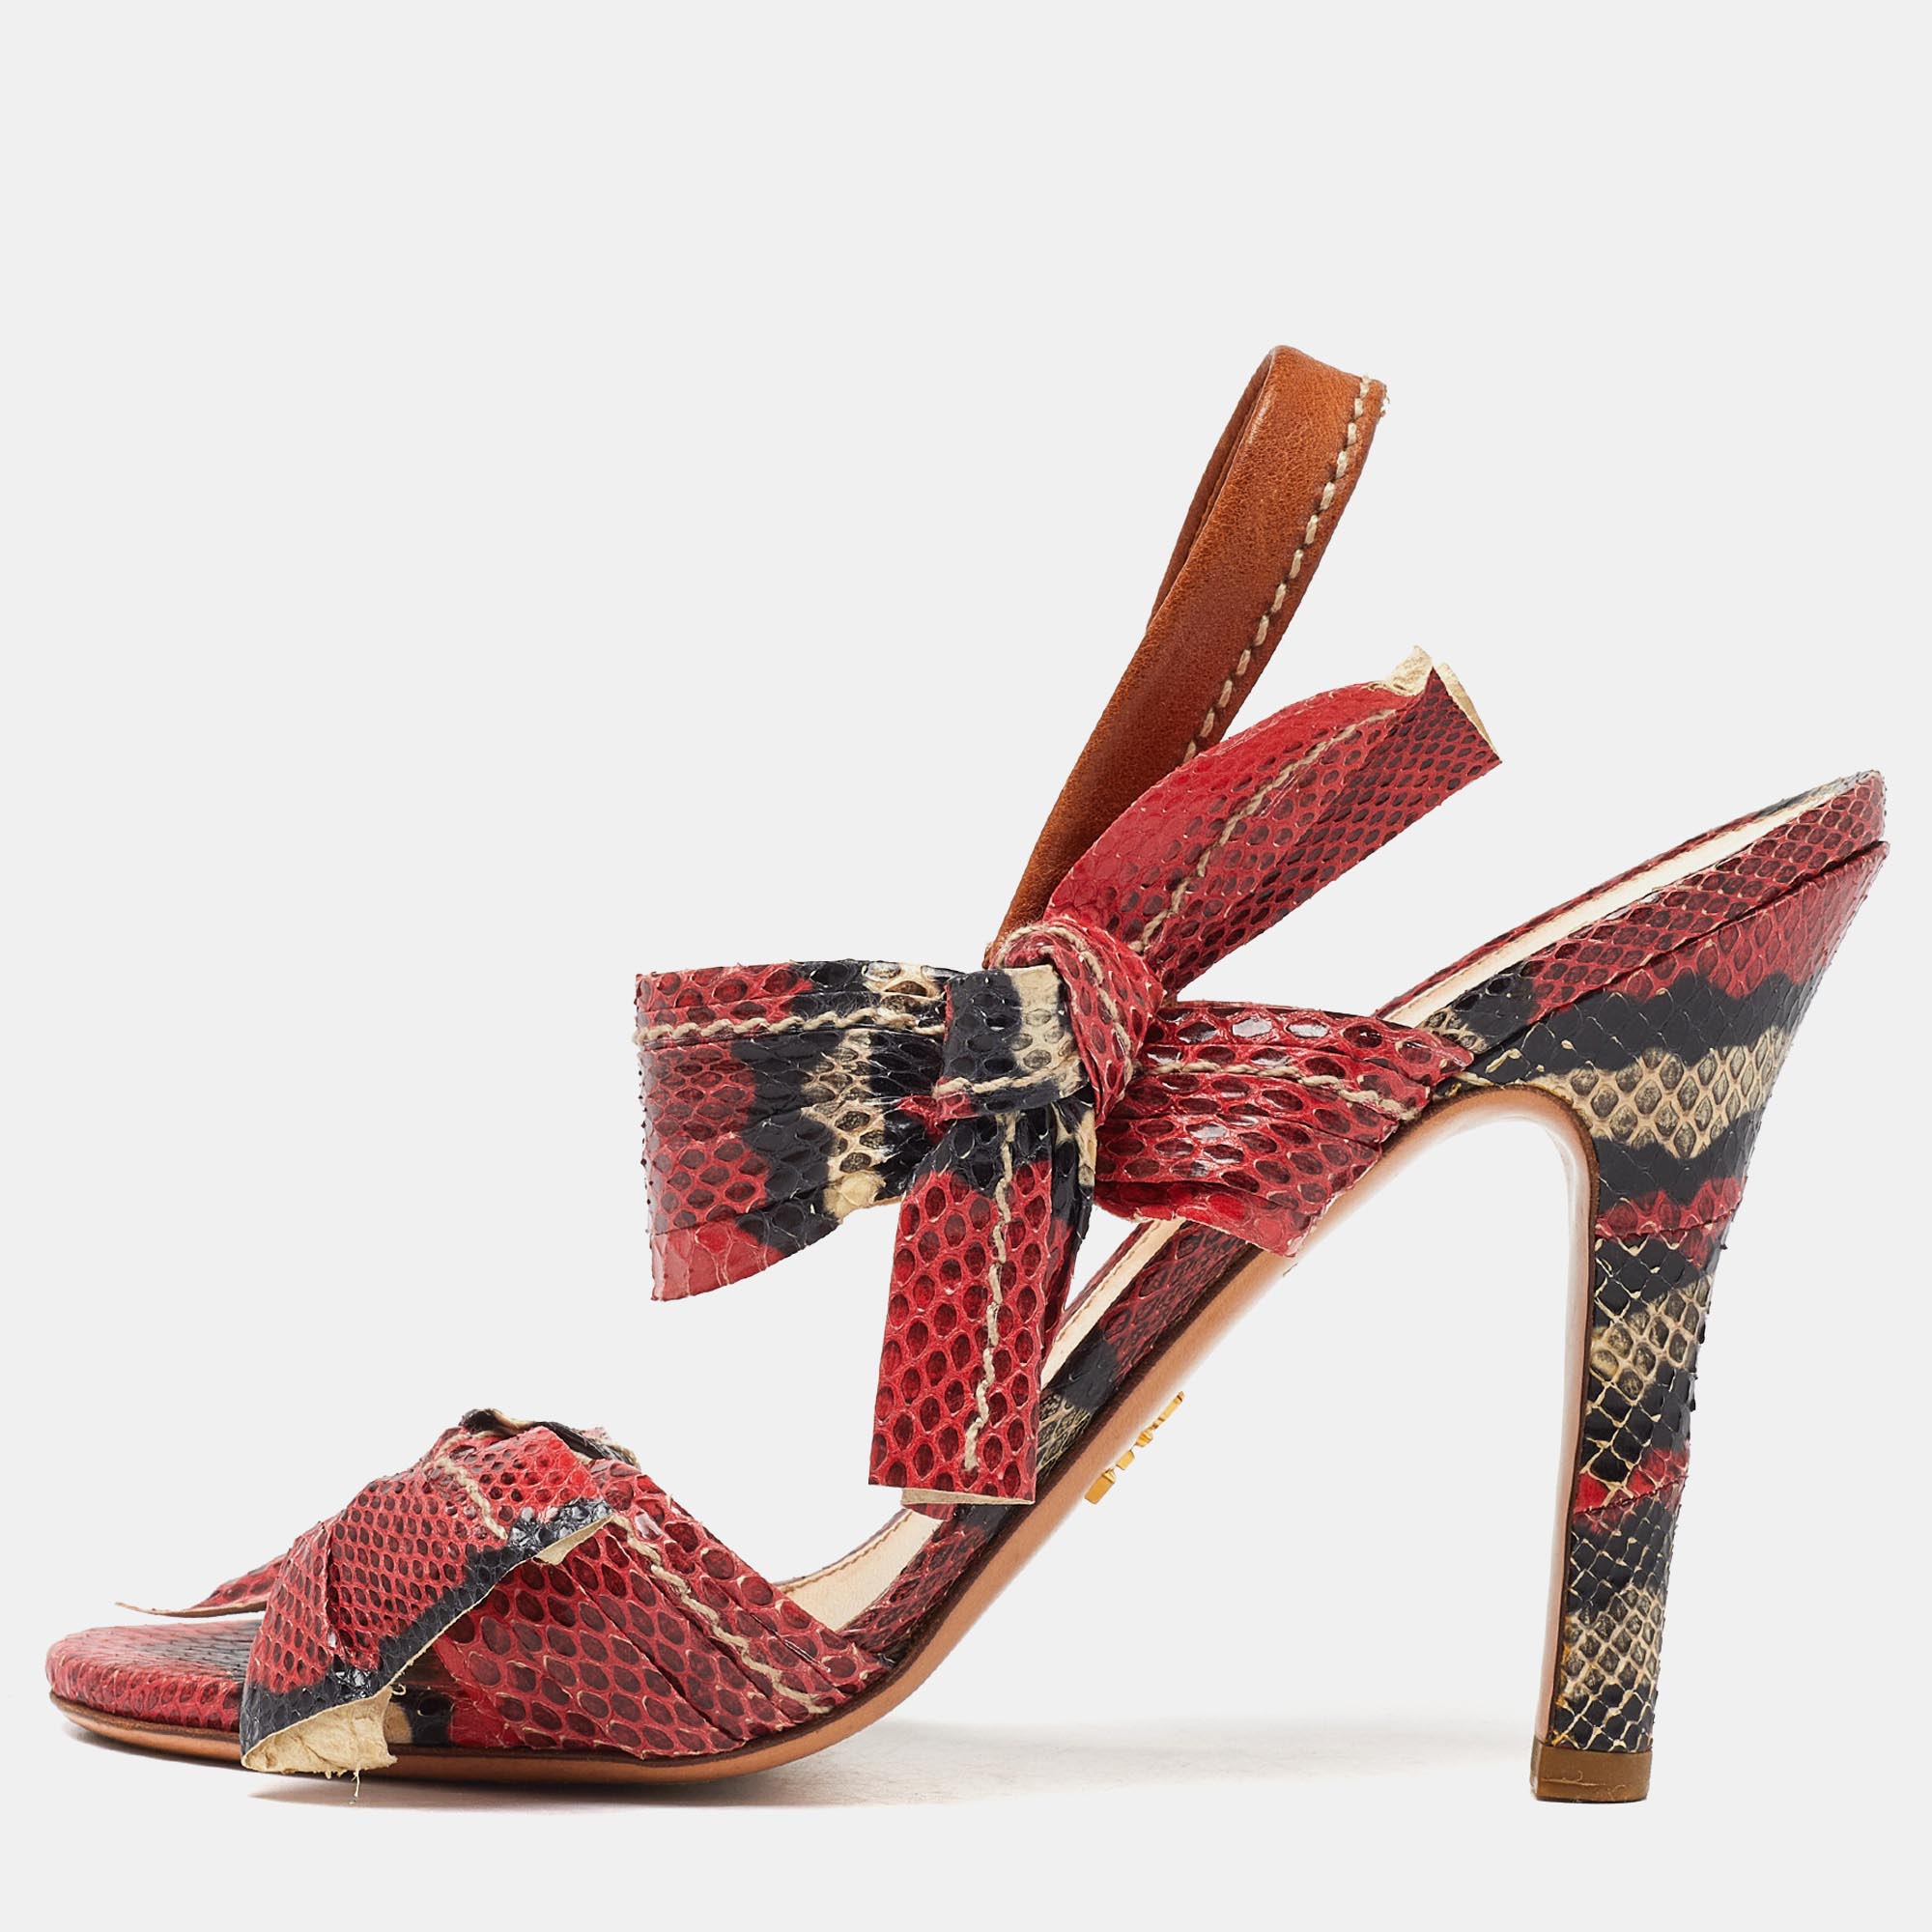 Prada pink python leather bow ankle strap sandals size 36.5